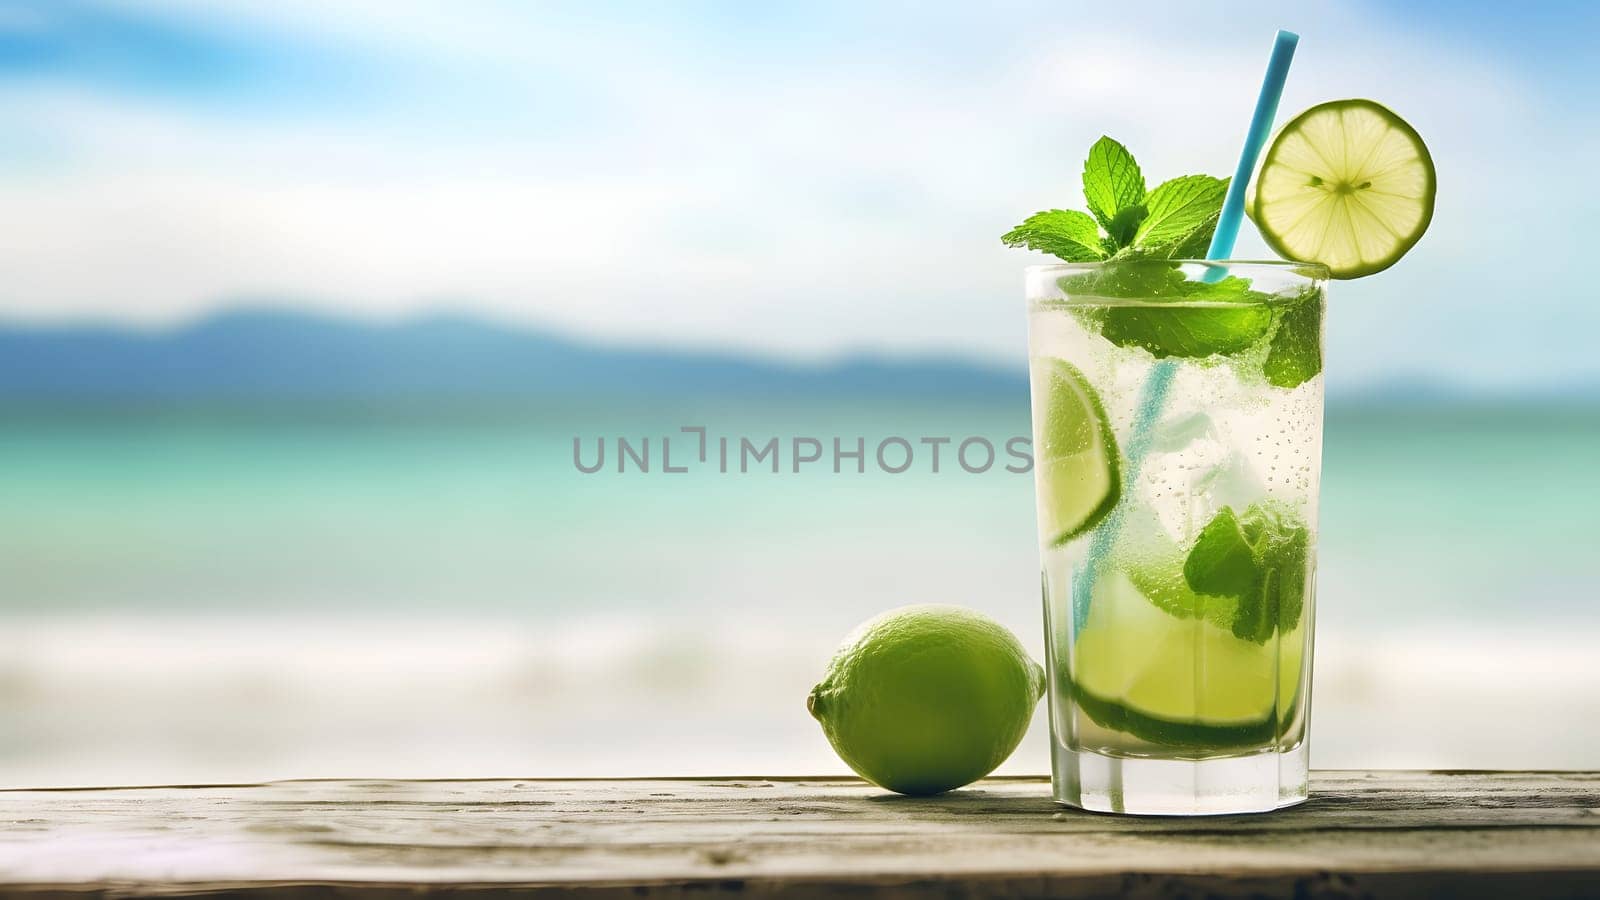 a glass of refreshing mint mojito summer drink on sea background at sunny day, closeup with selective focus and copy space, neural network generated image by z1b